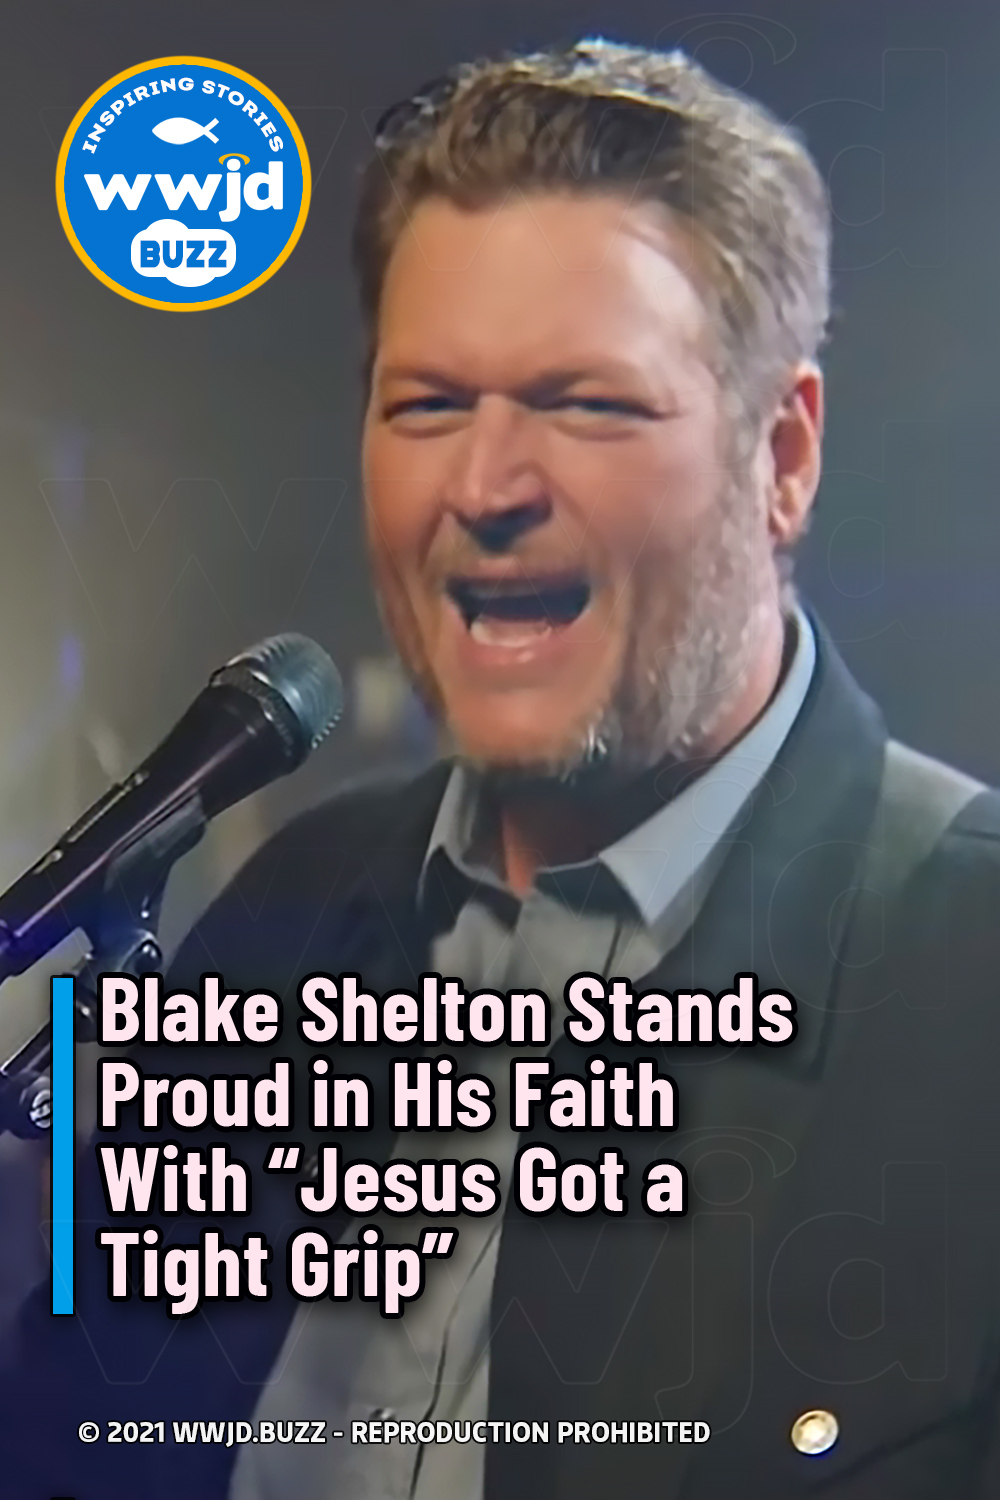 Blake Shelton Stands Proud in His Faith With “Jesus Got a Tight Grip”